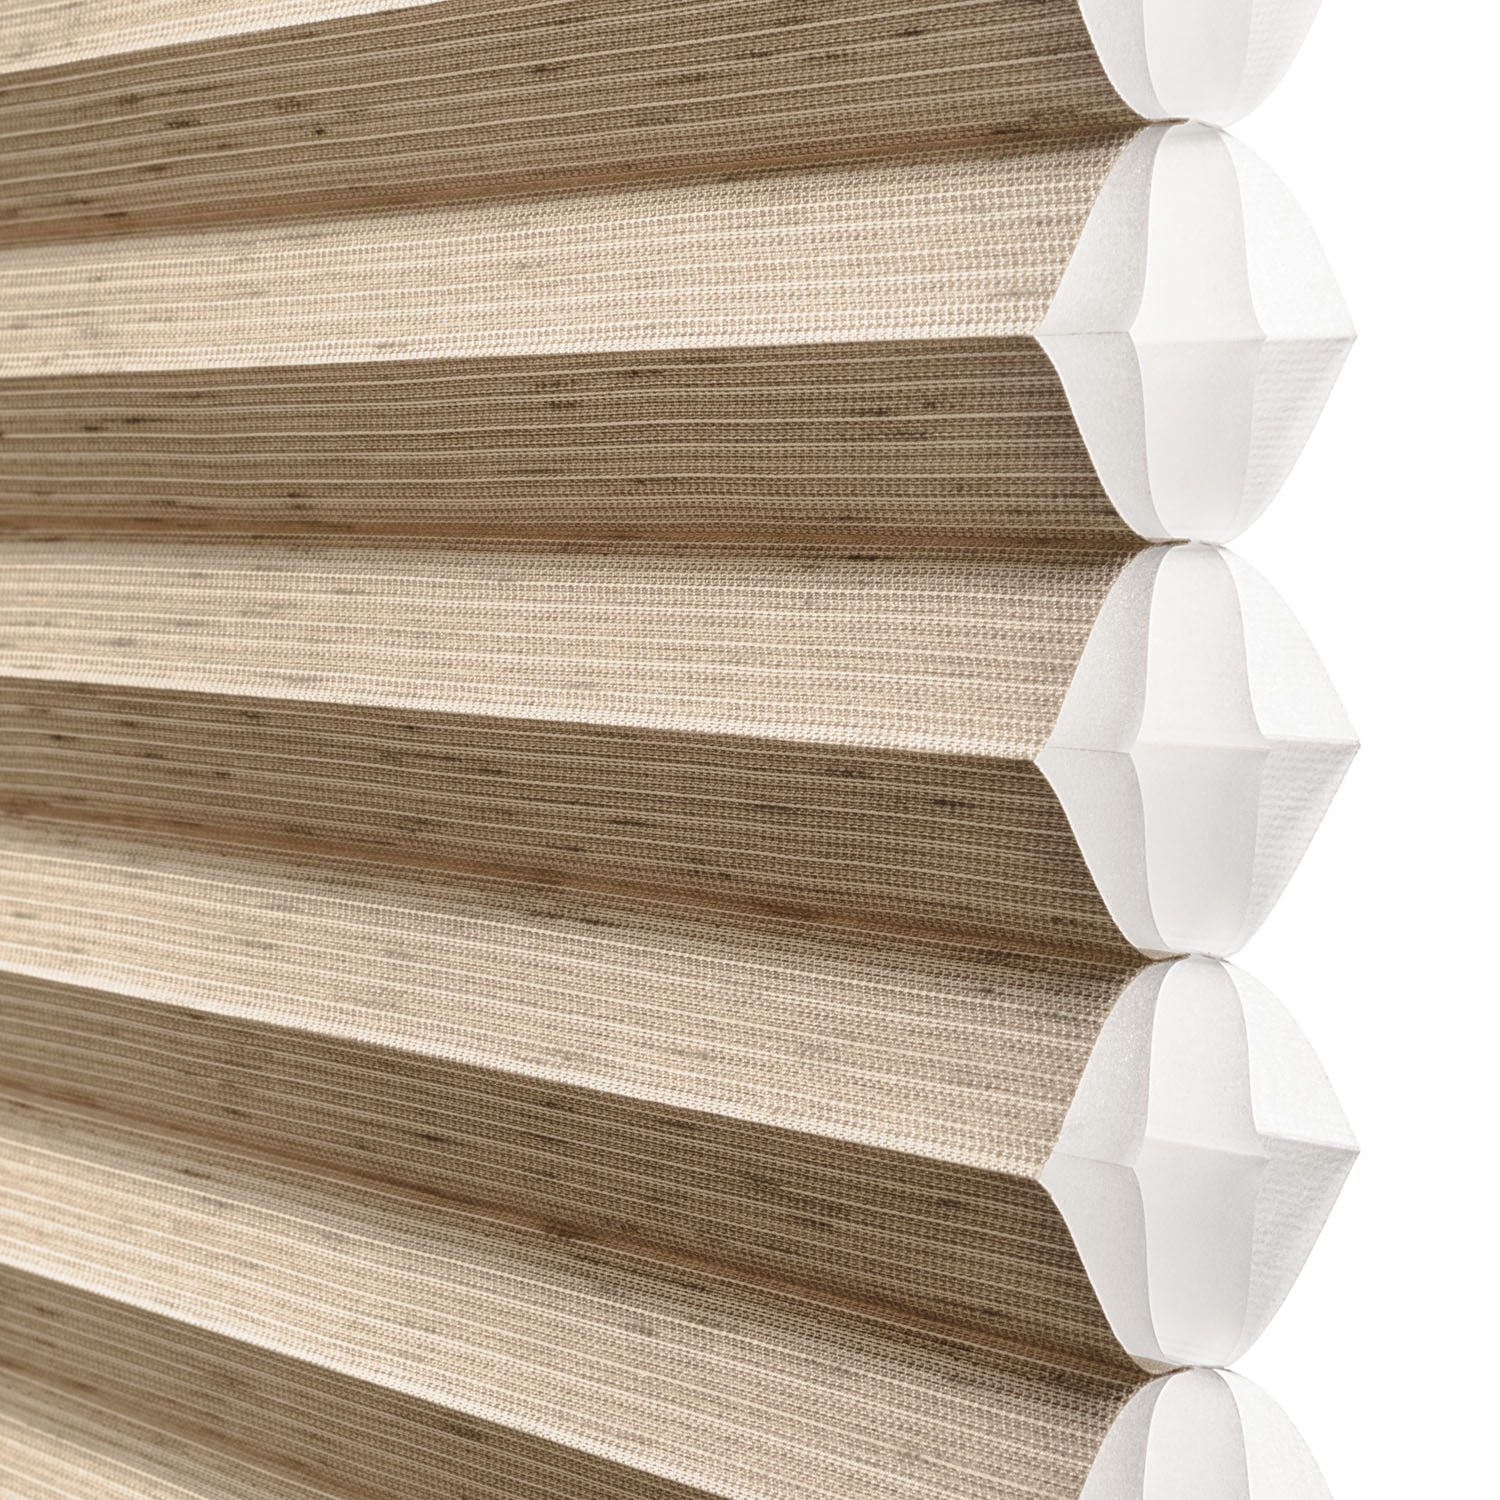 Close-up of Hunter Douglas Duette® Honeycomb Shades, providing thermal insulation.